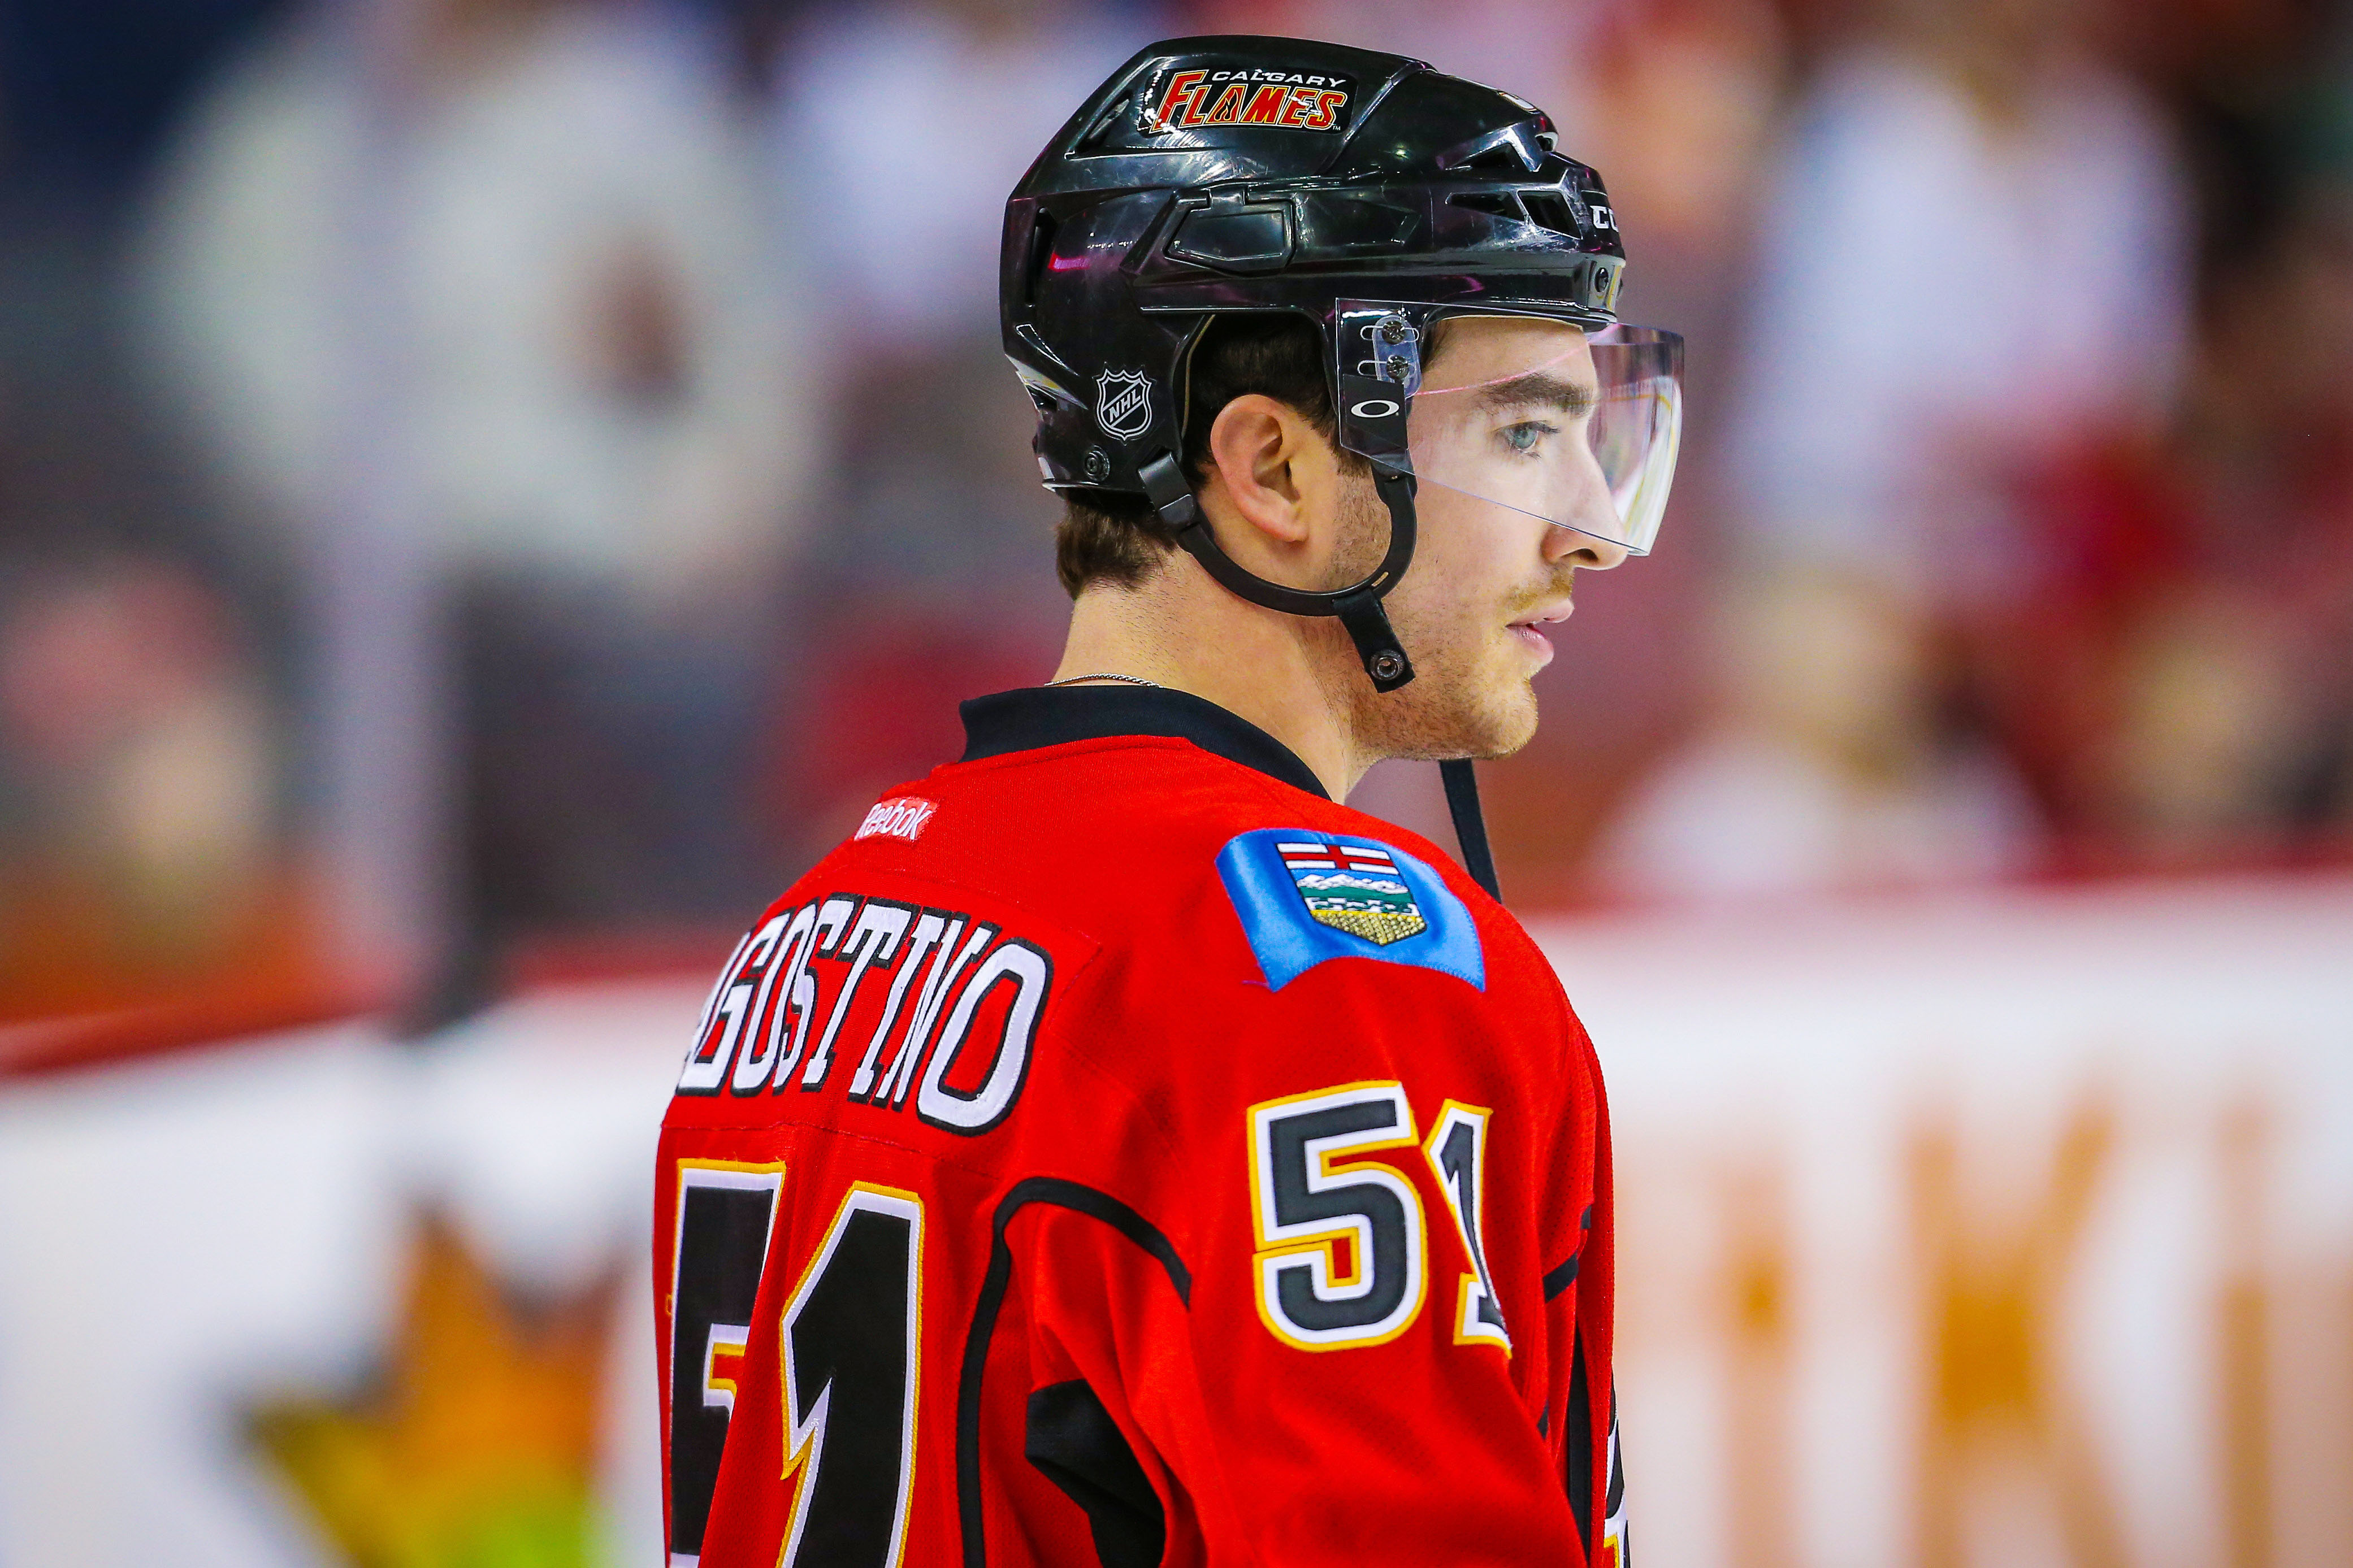 Kenny Agostino and the Heat are down, but not out.